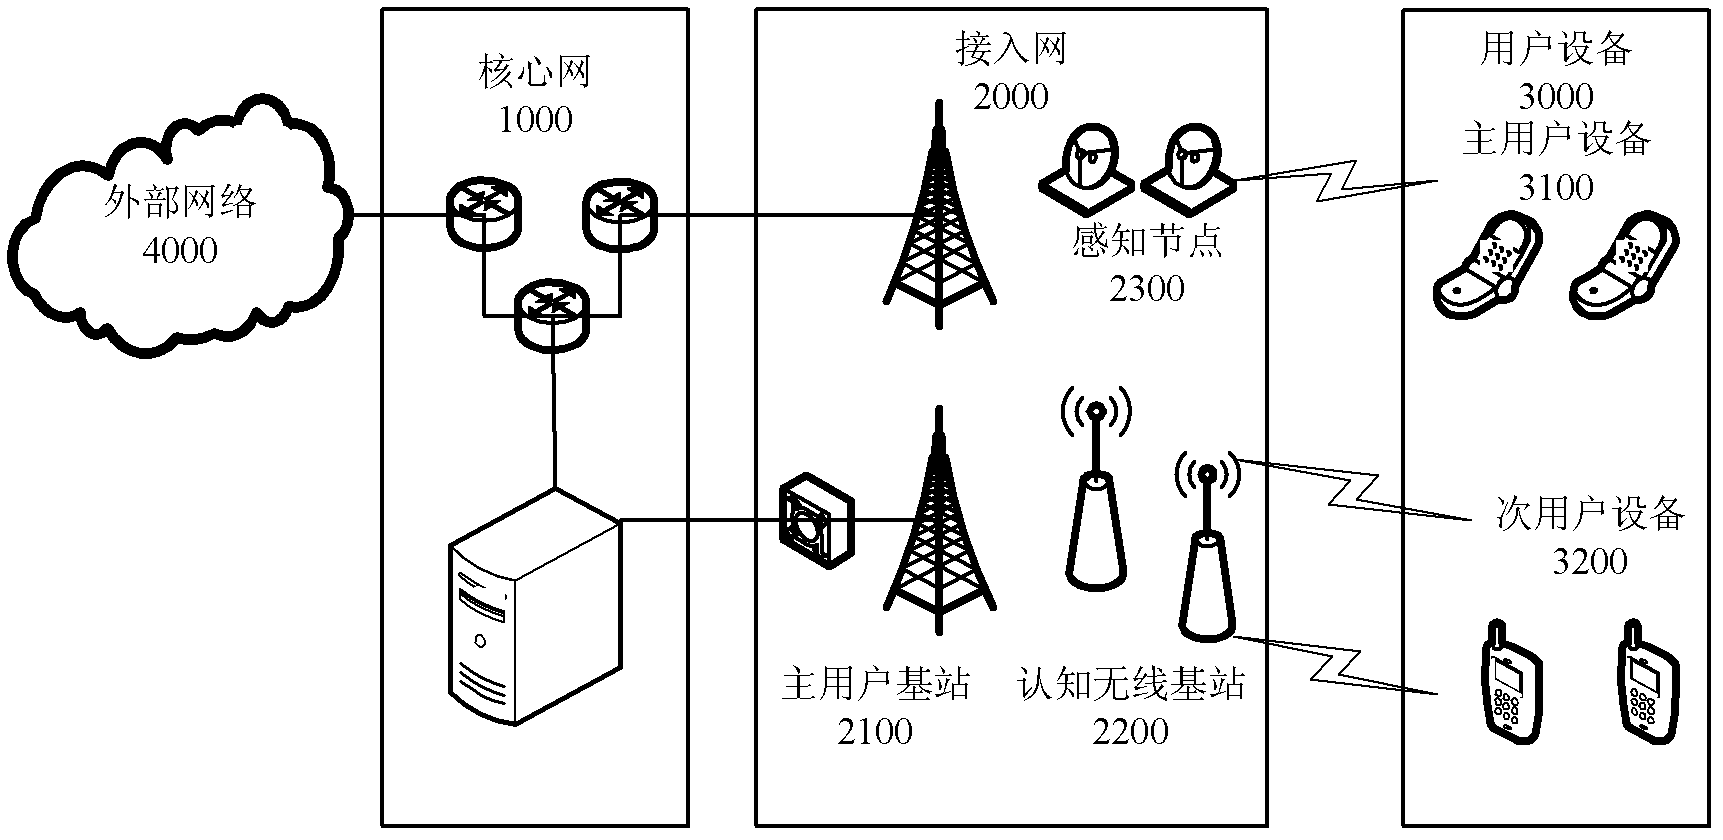 Method for cross layer resource distribution and grouped dispatch in cognitive wireless network